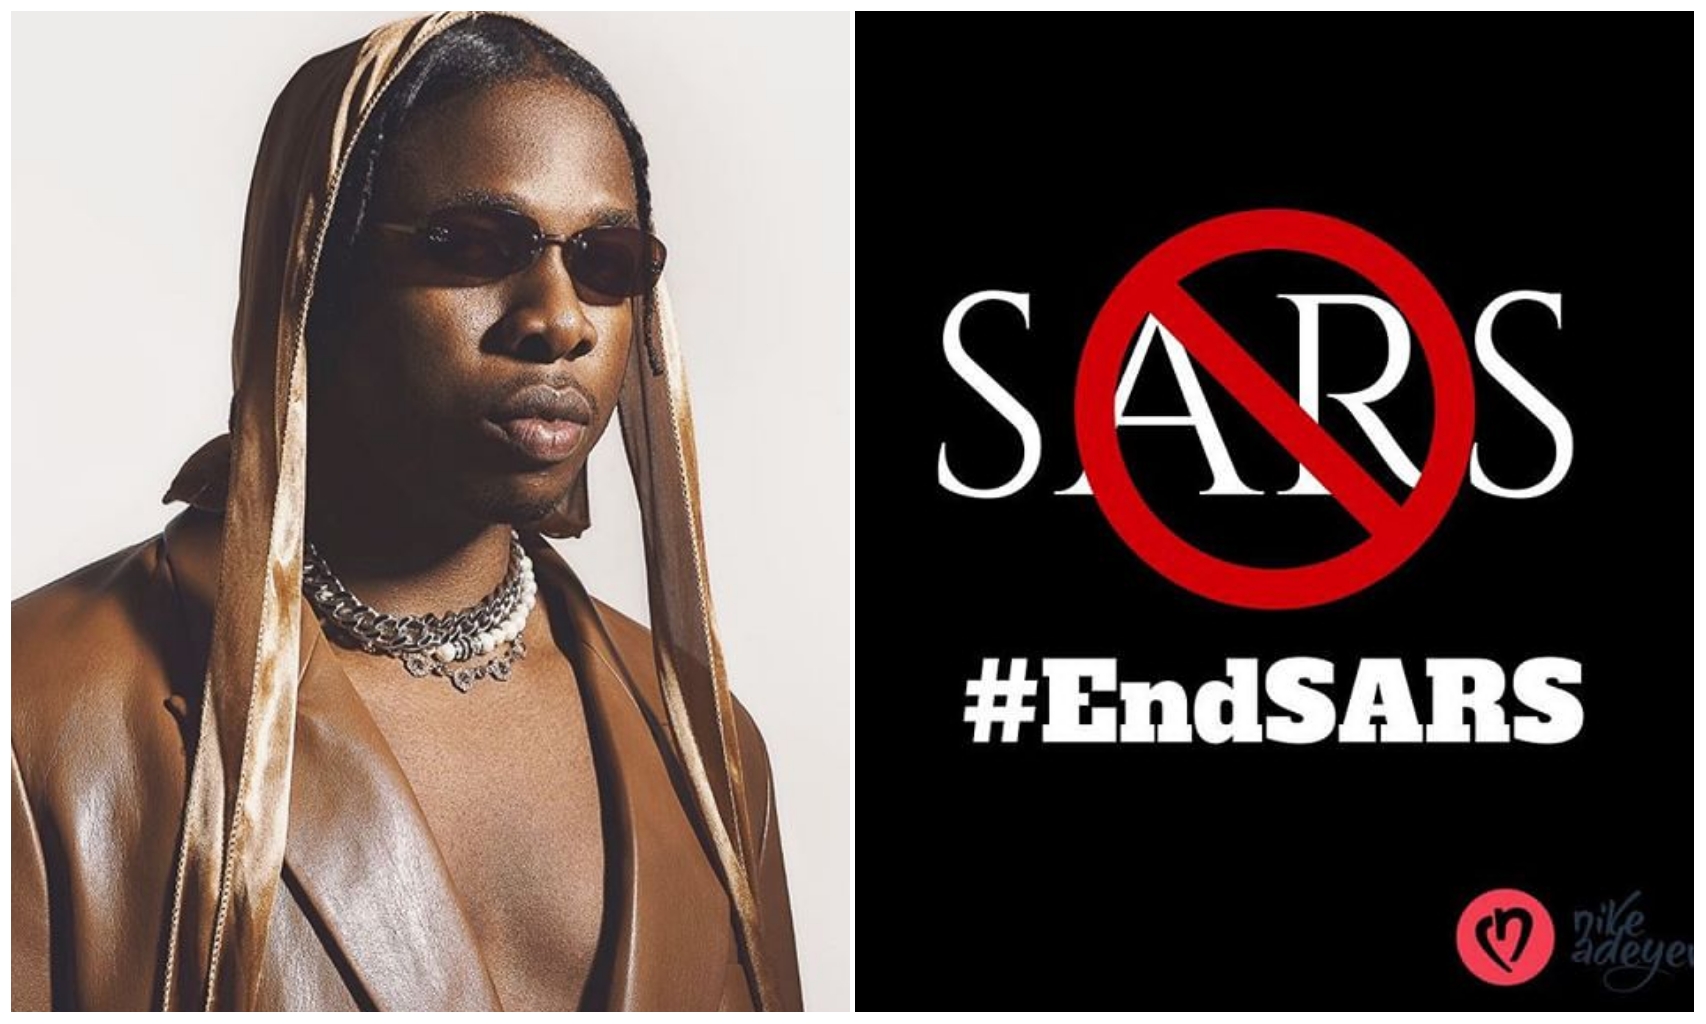 “Thursday is Thursday – Singer Runtown vows not to back down on proposed EndSARS protest